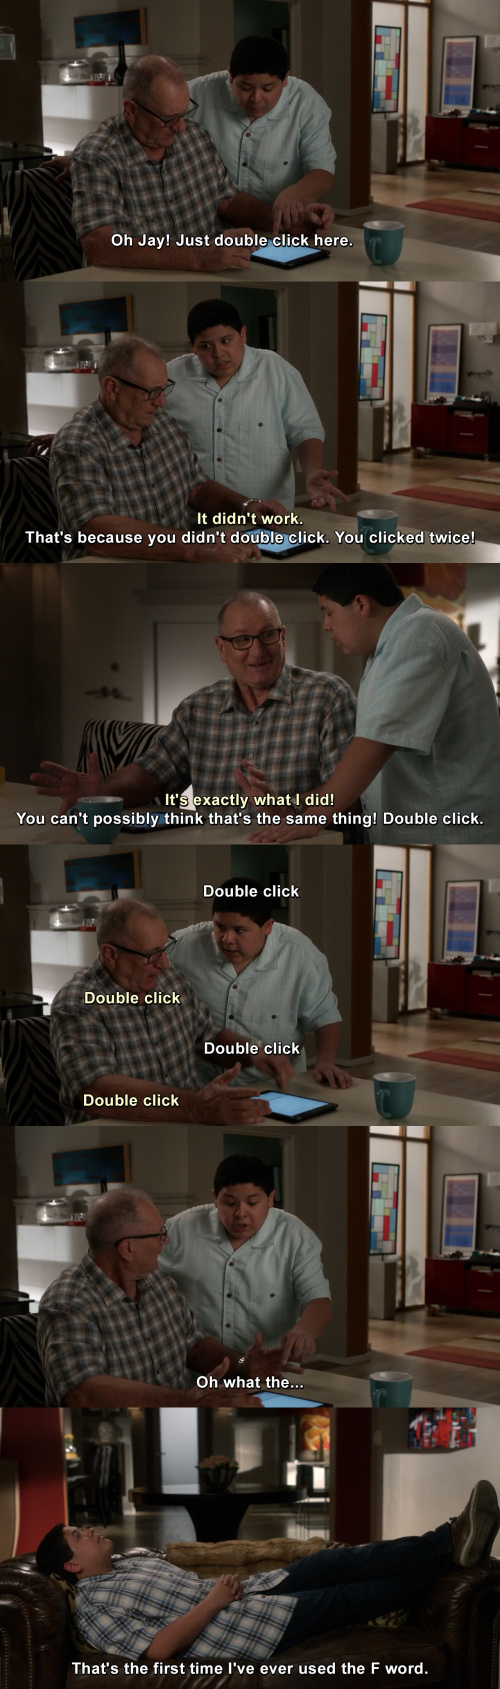 Modern Family - 100% me and my entire family